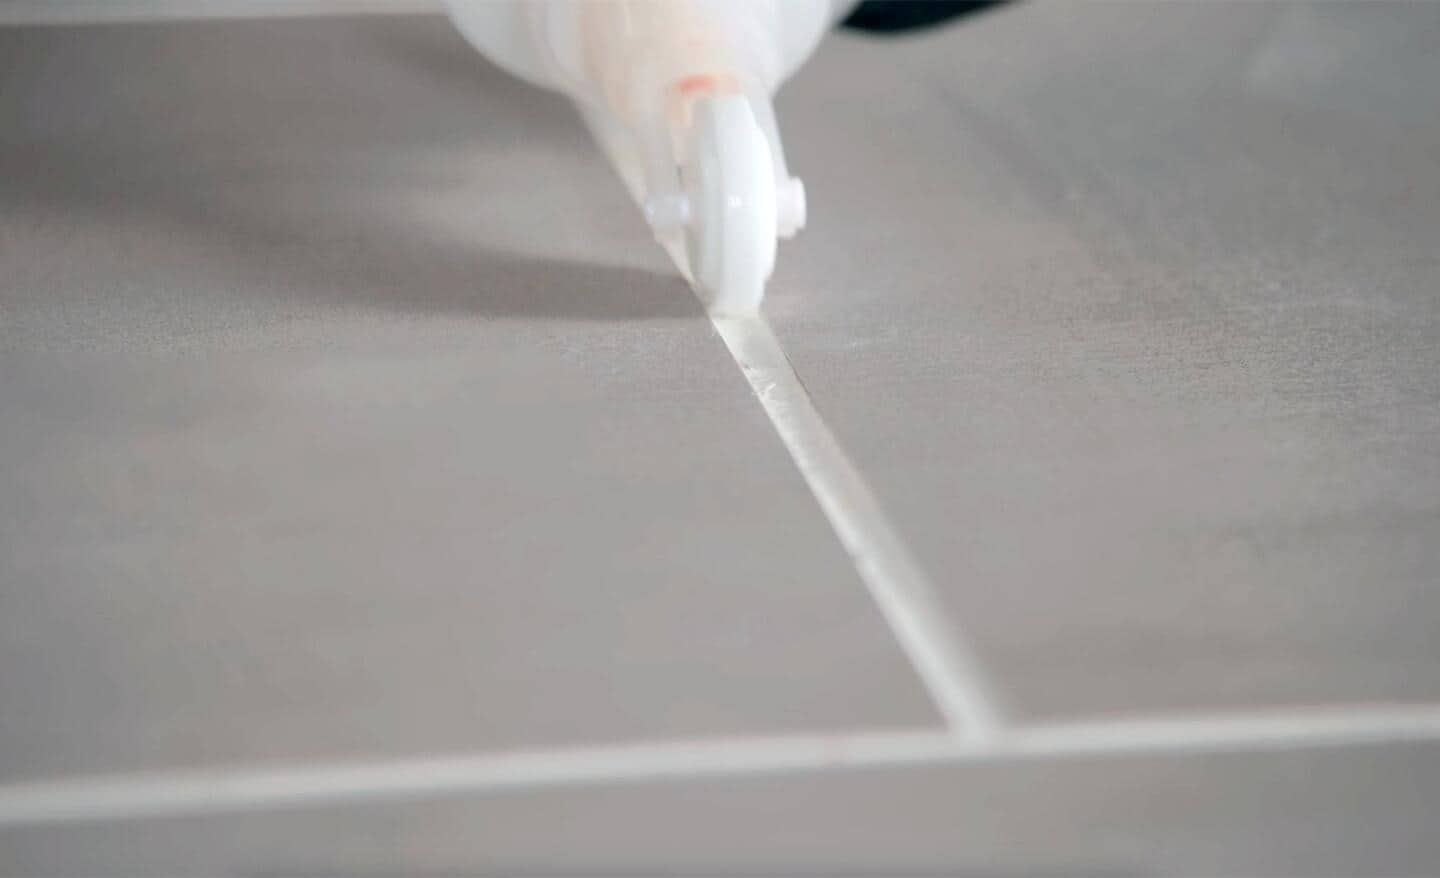 Applying sealer to a grout joint on a tile floor